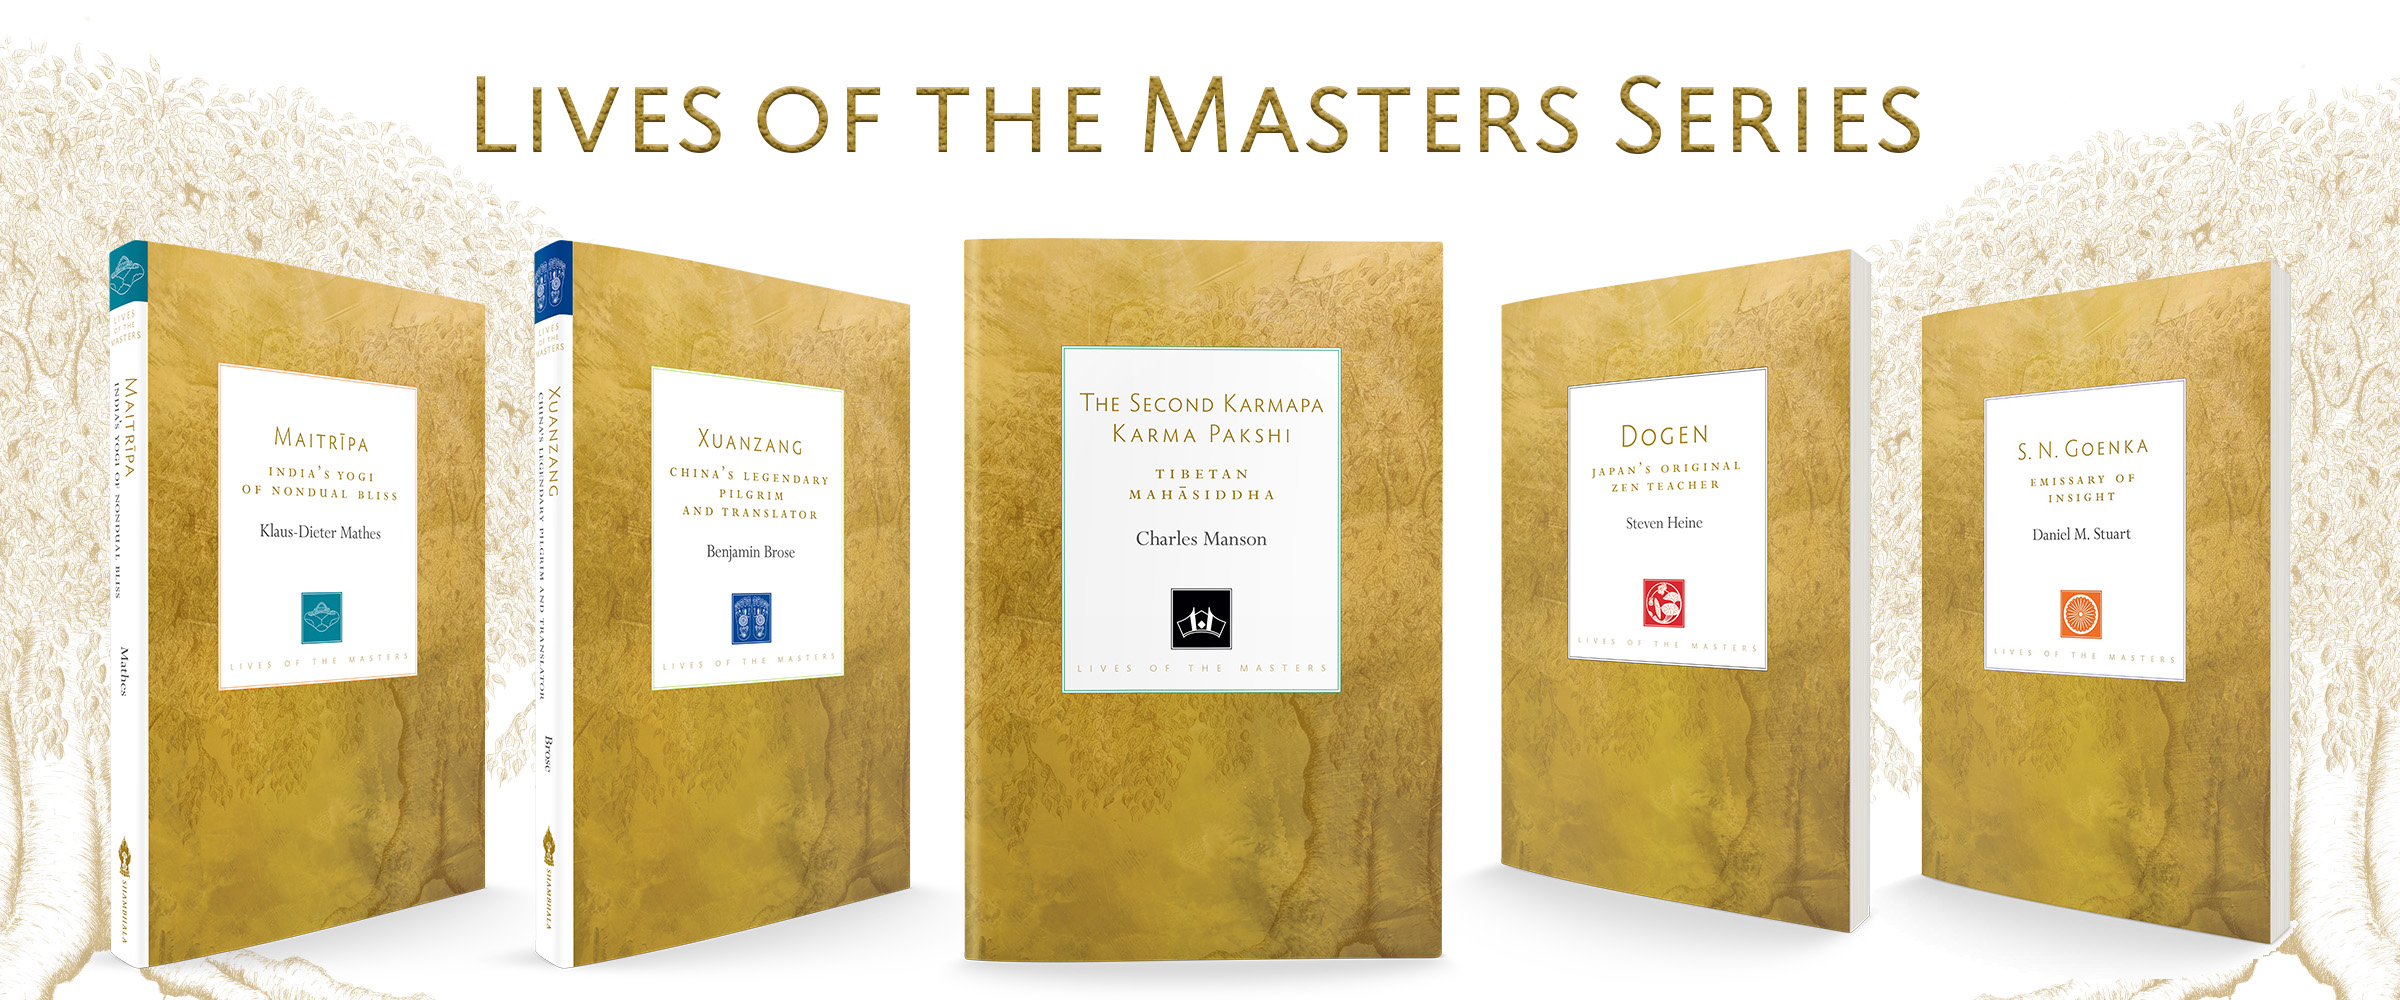 Lives of the Masters Series